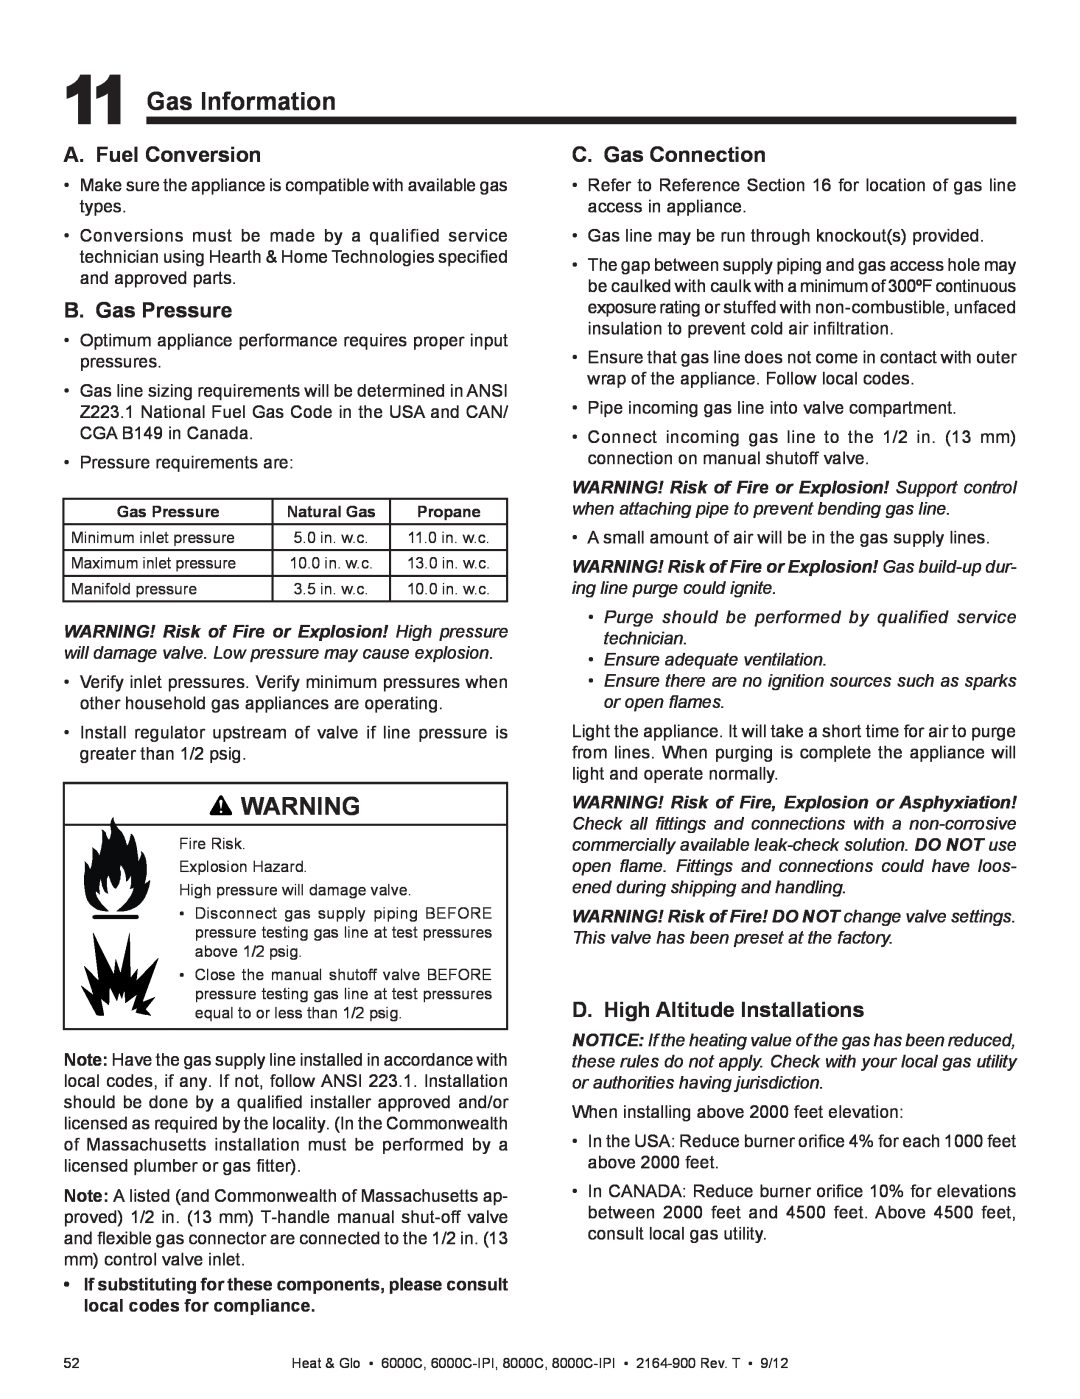 Heat & Glo LifeStyle 6000C manual Gas Information, A. Fuel Conversion, B. Gas Pressure, C. Gas Connection 